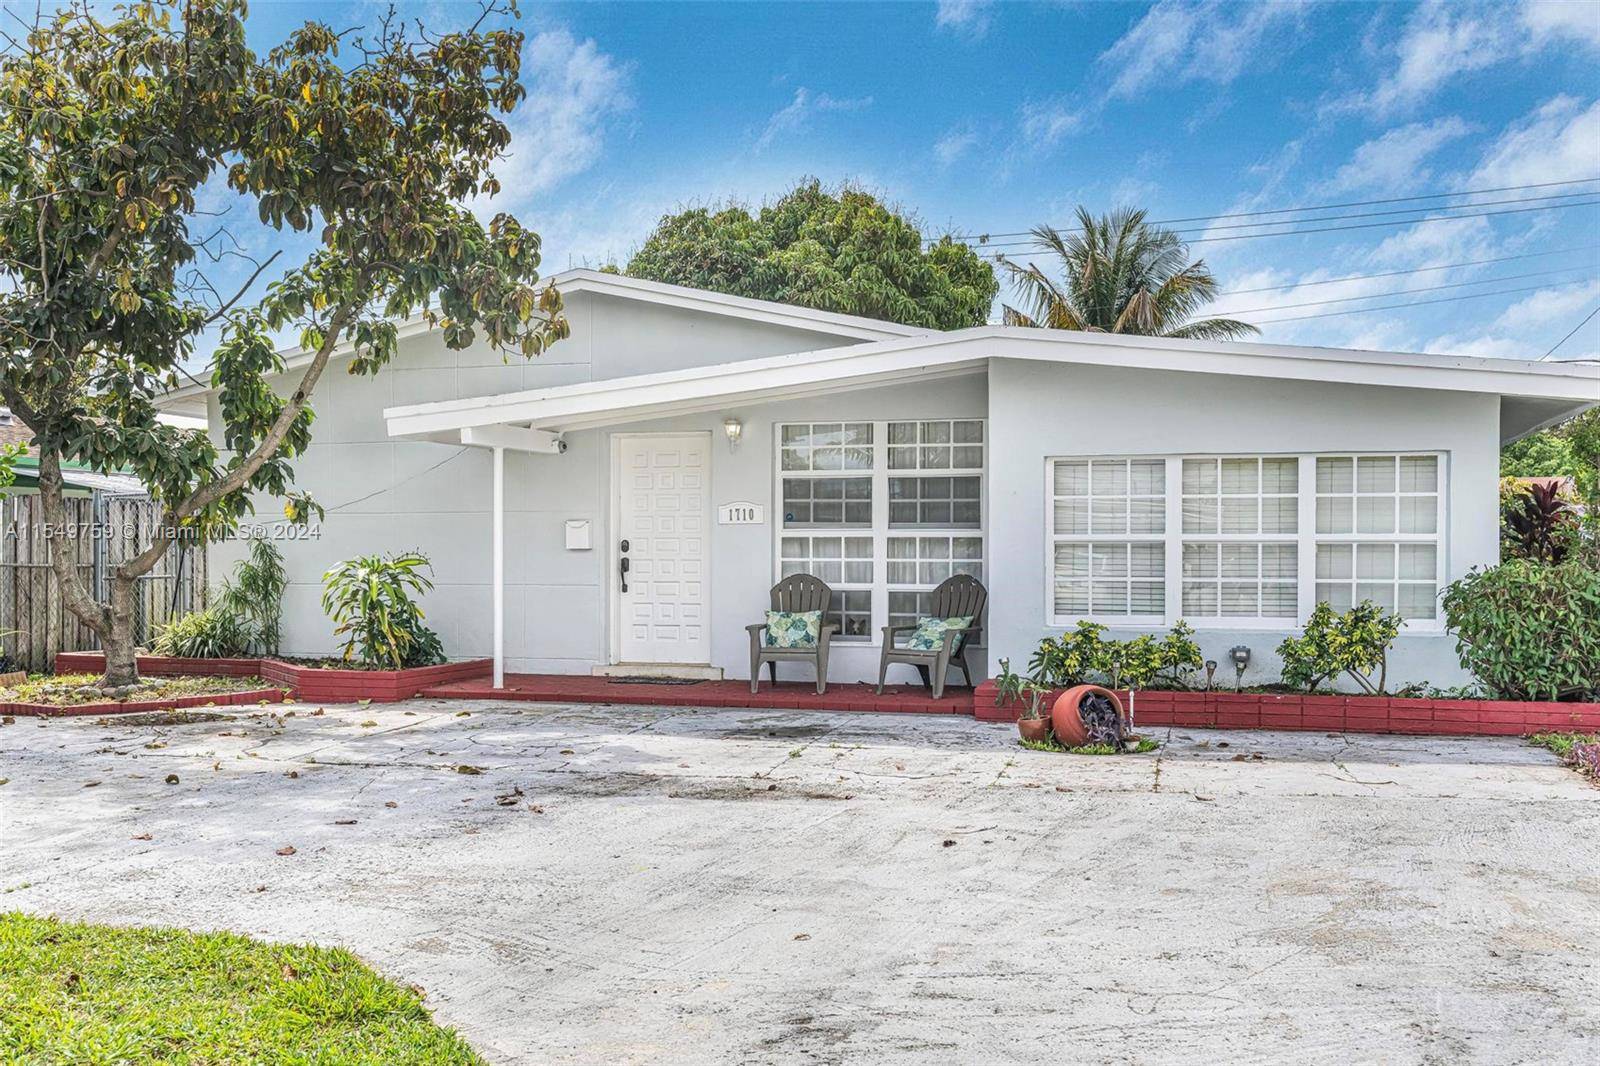 This lovely 3 bedroom 2 bathroom home has an open floor plan and located in North Miami Beach.